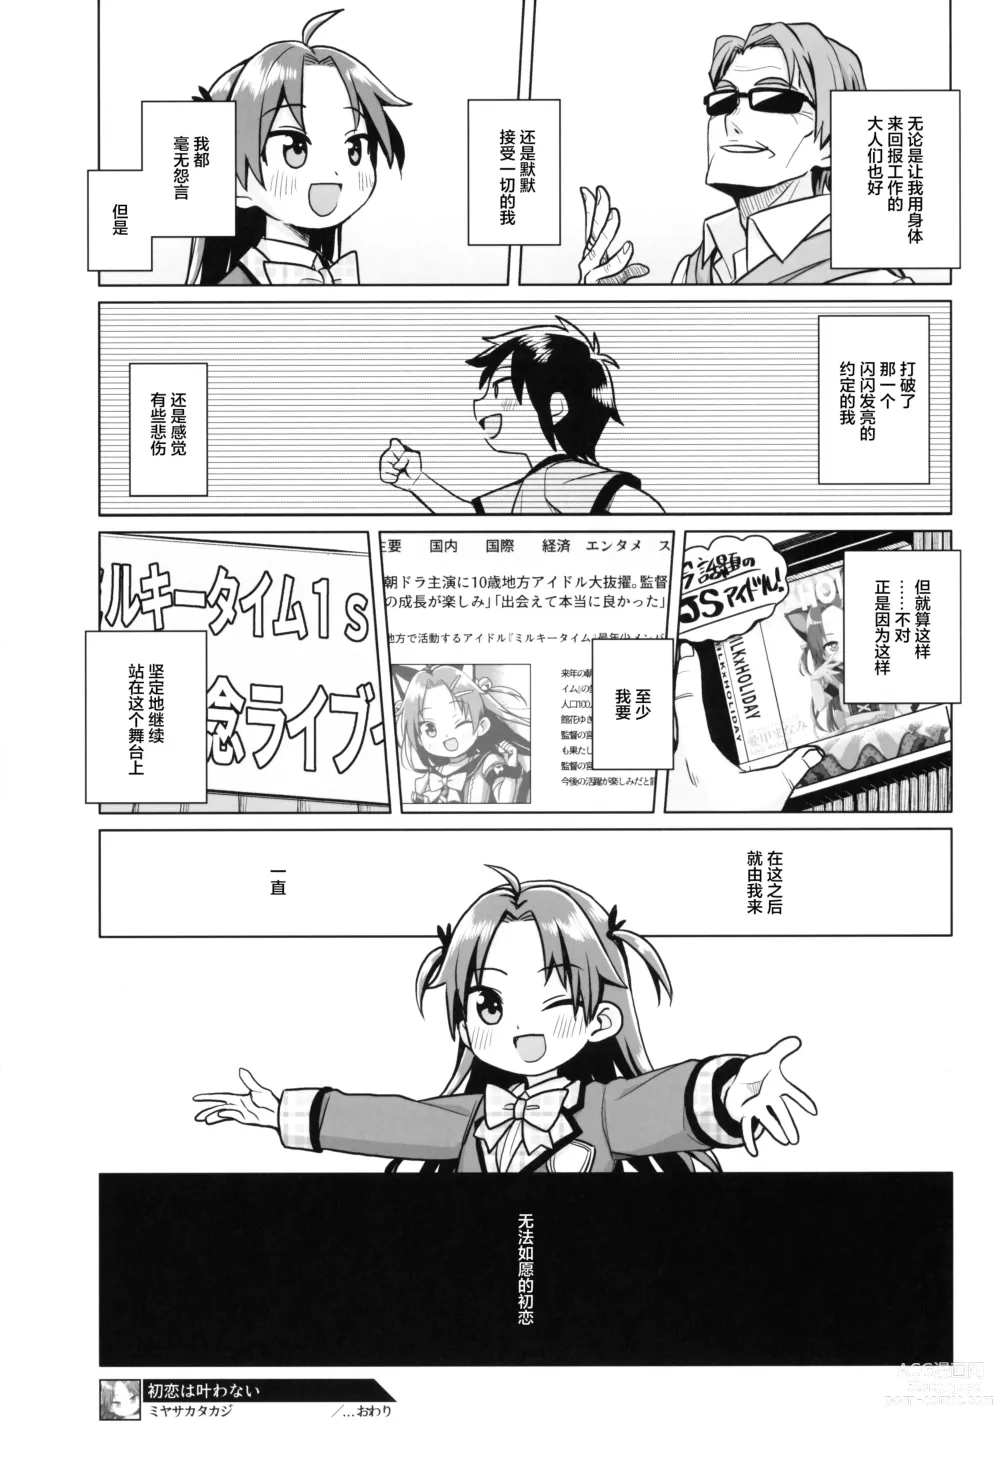 Page 22 of doujinshi 无法如愿的初恋